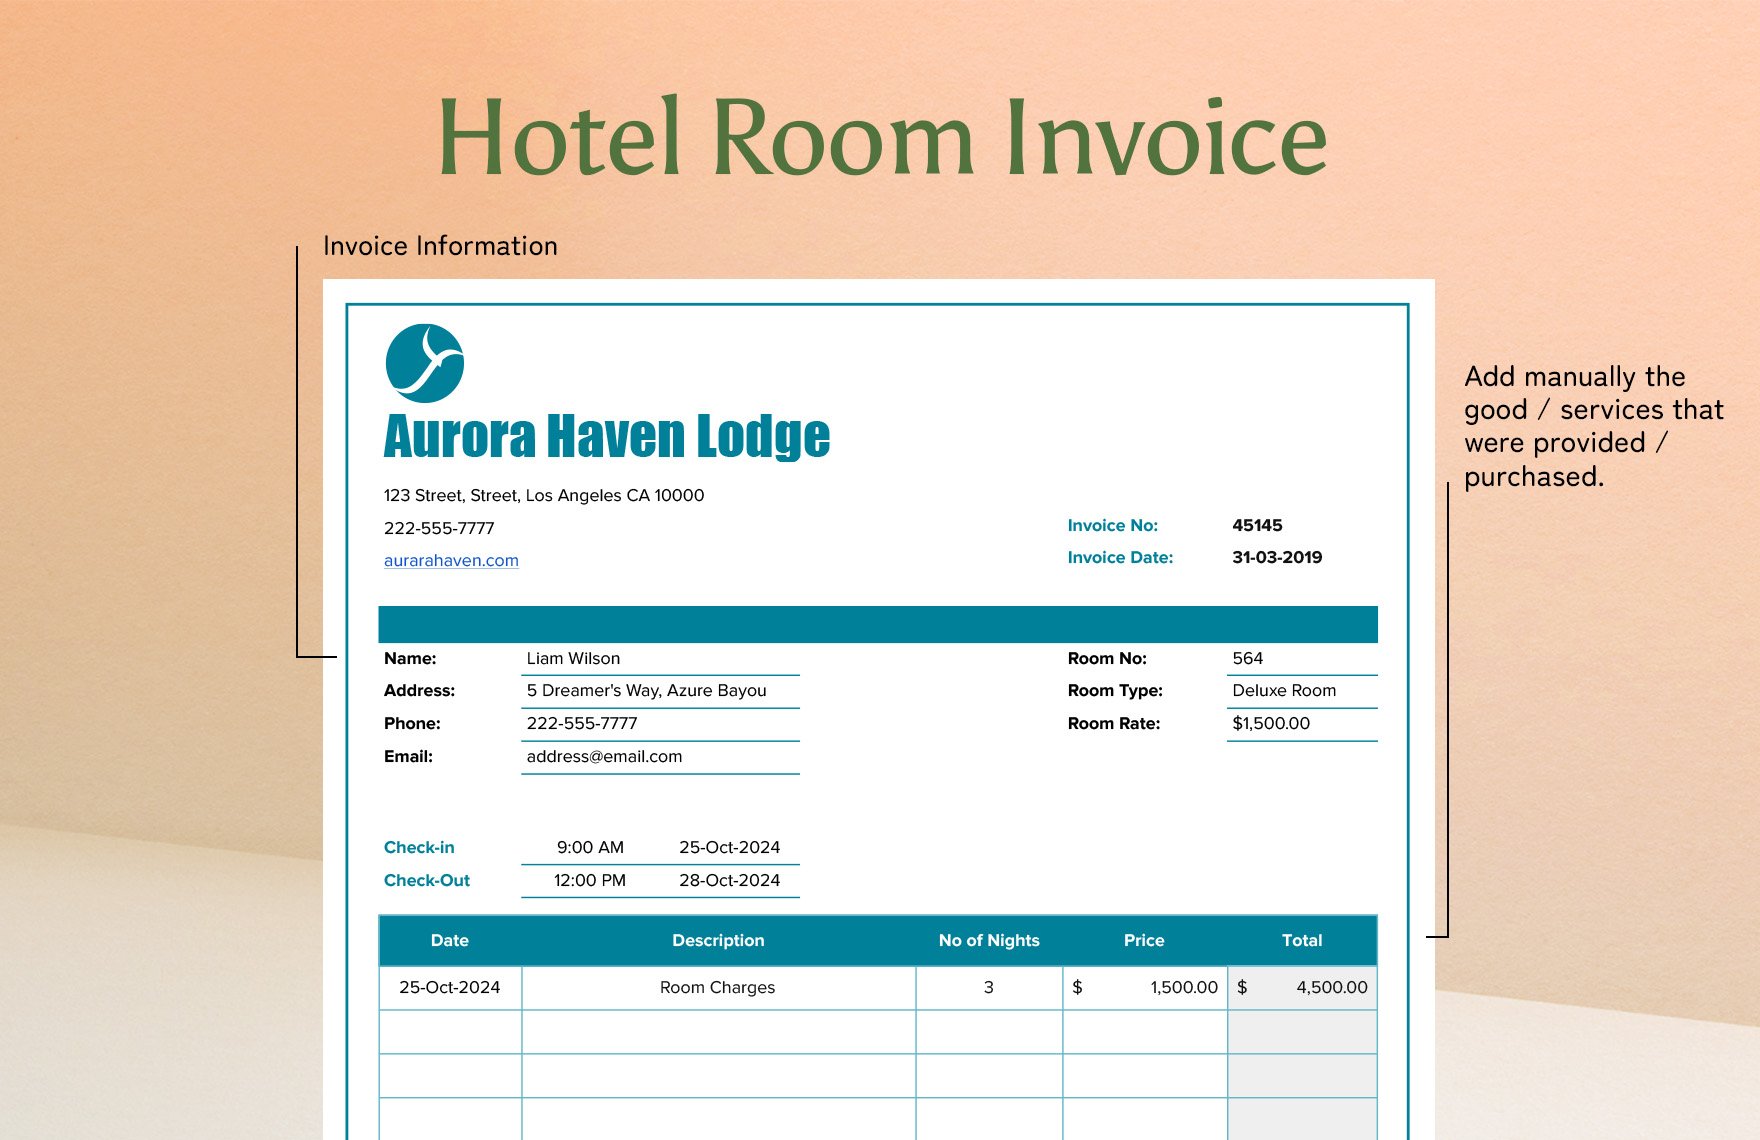 Hotel Room Invoice Template Download in Word, Google Docs, Excel, PDF